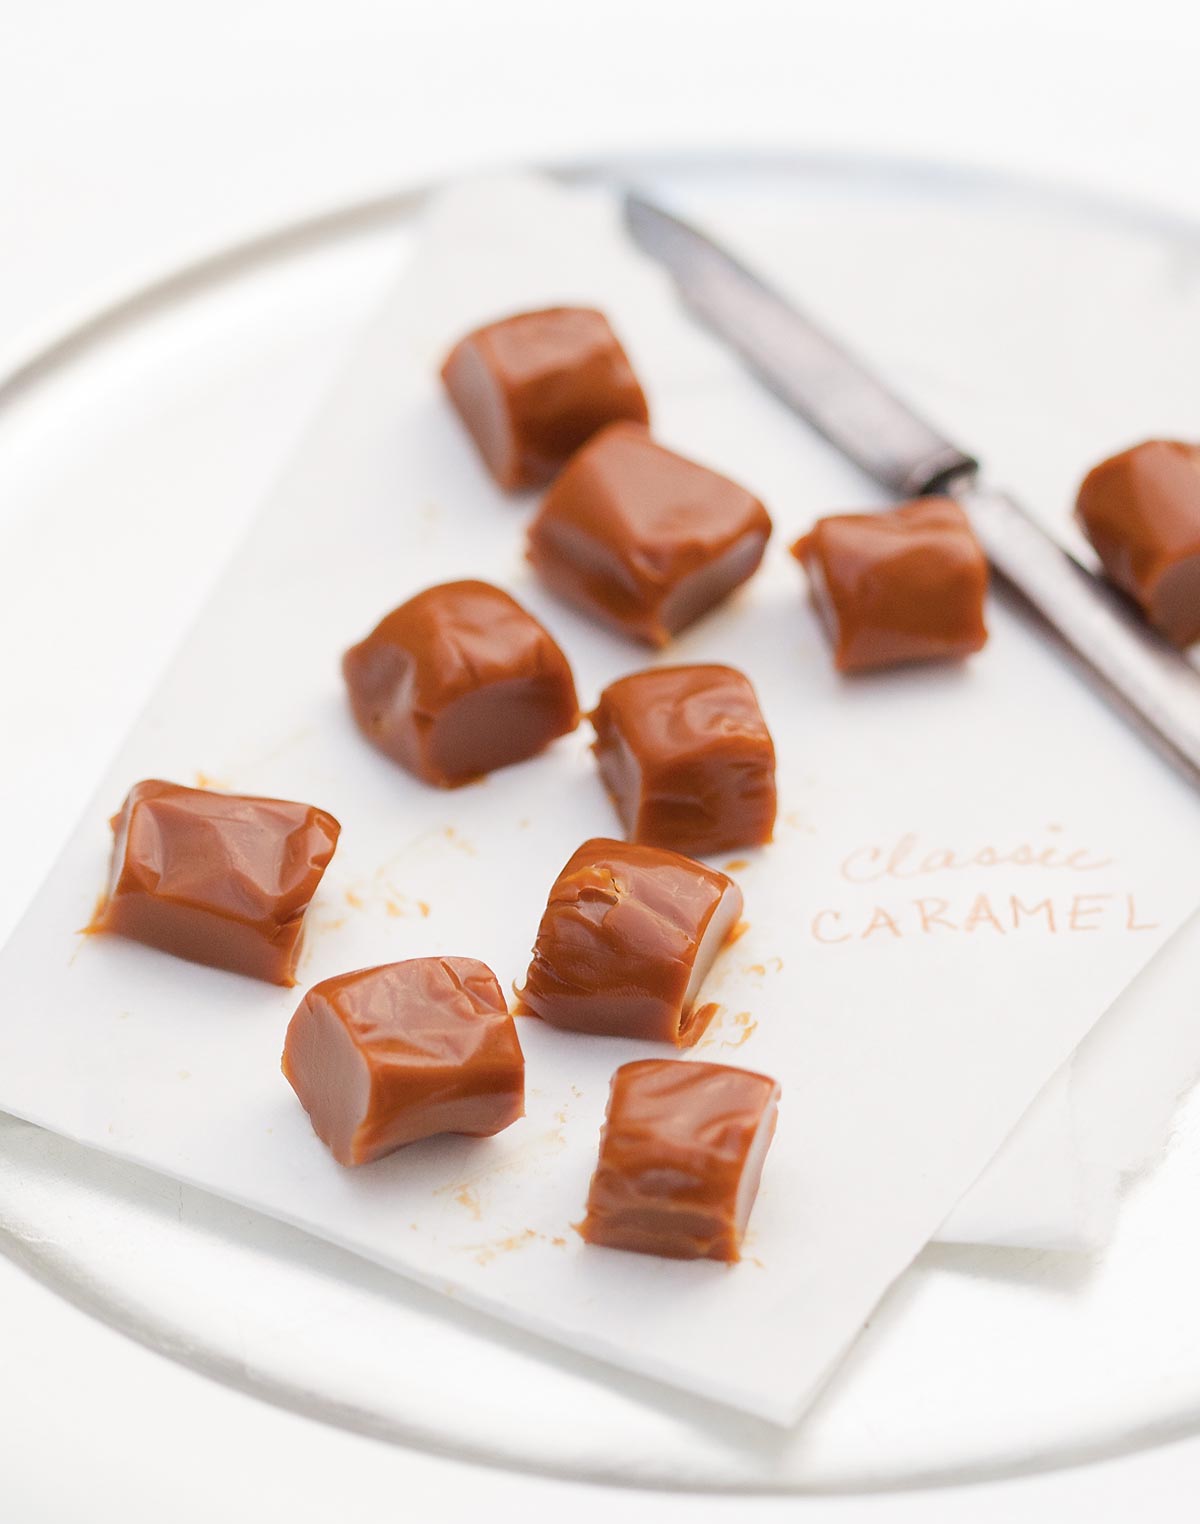 Pieces of classic caramels on a sheet of parchment.